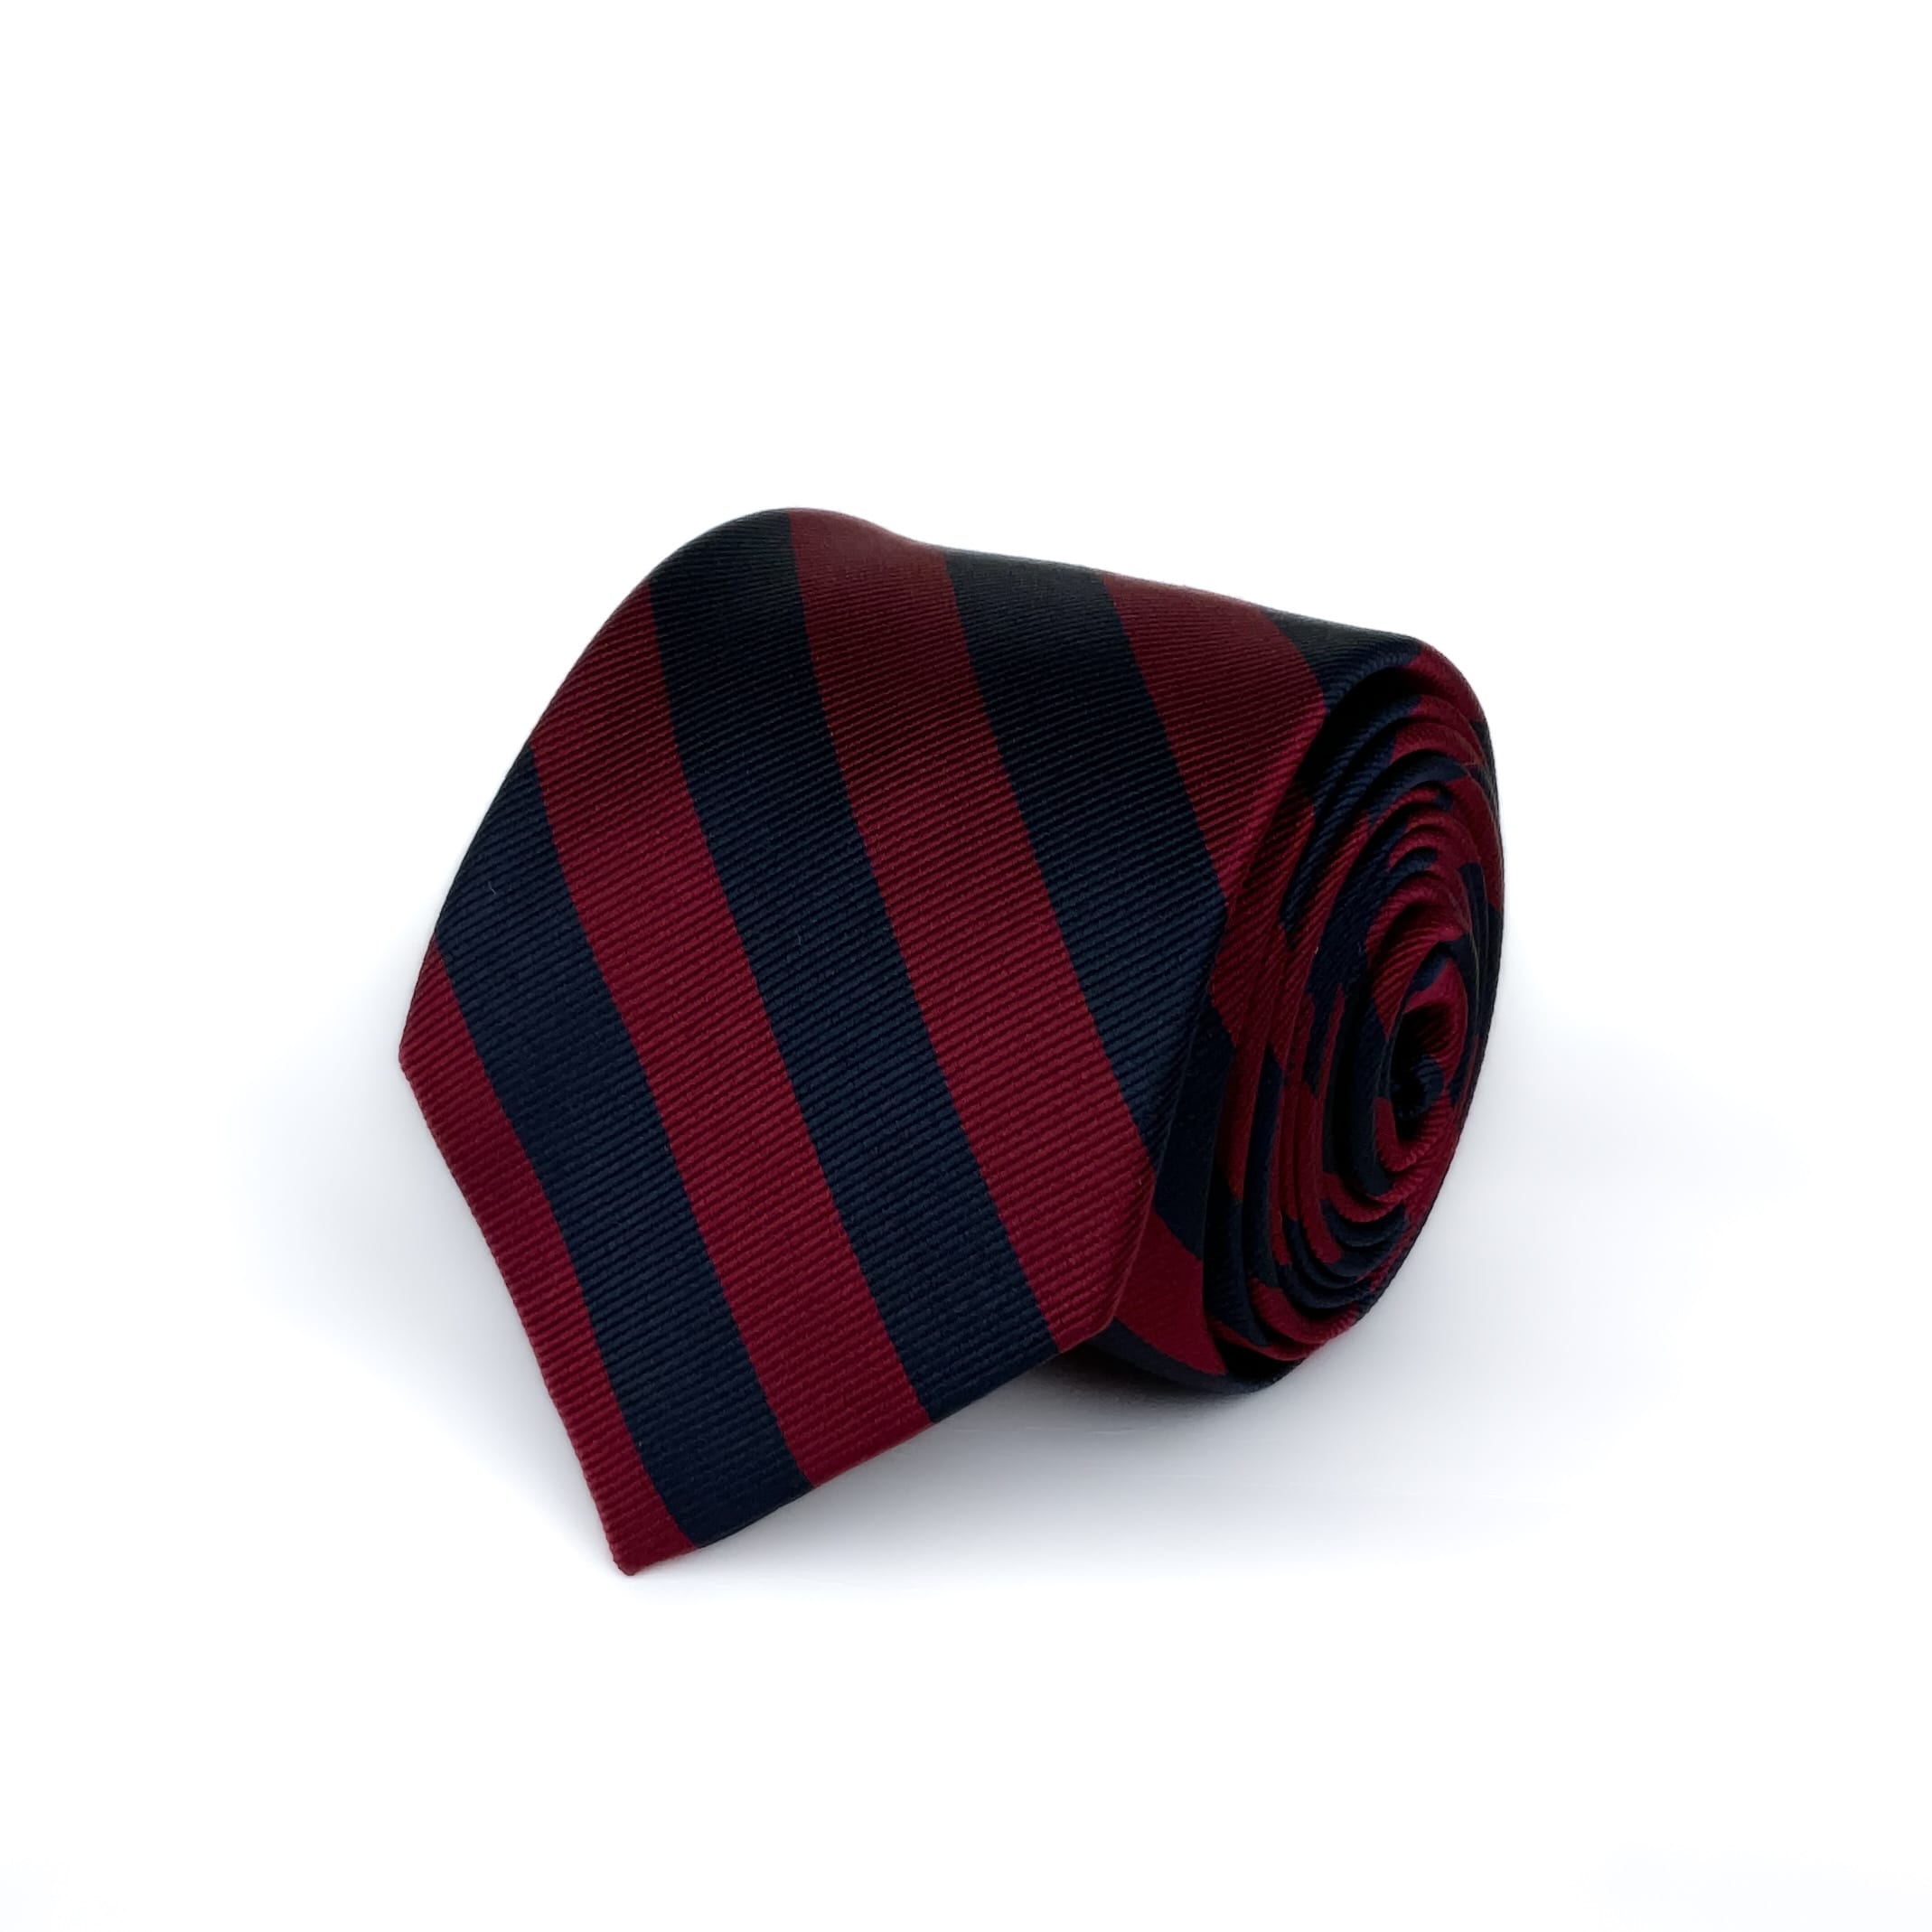 Red and Navy Blue Striped Silk Regimental tie rolled an placed on a white background